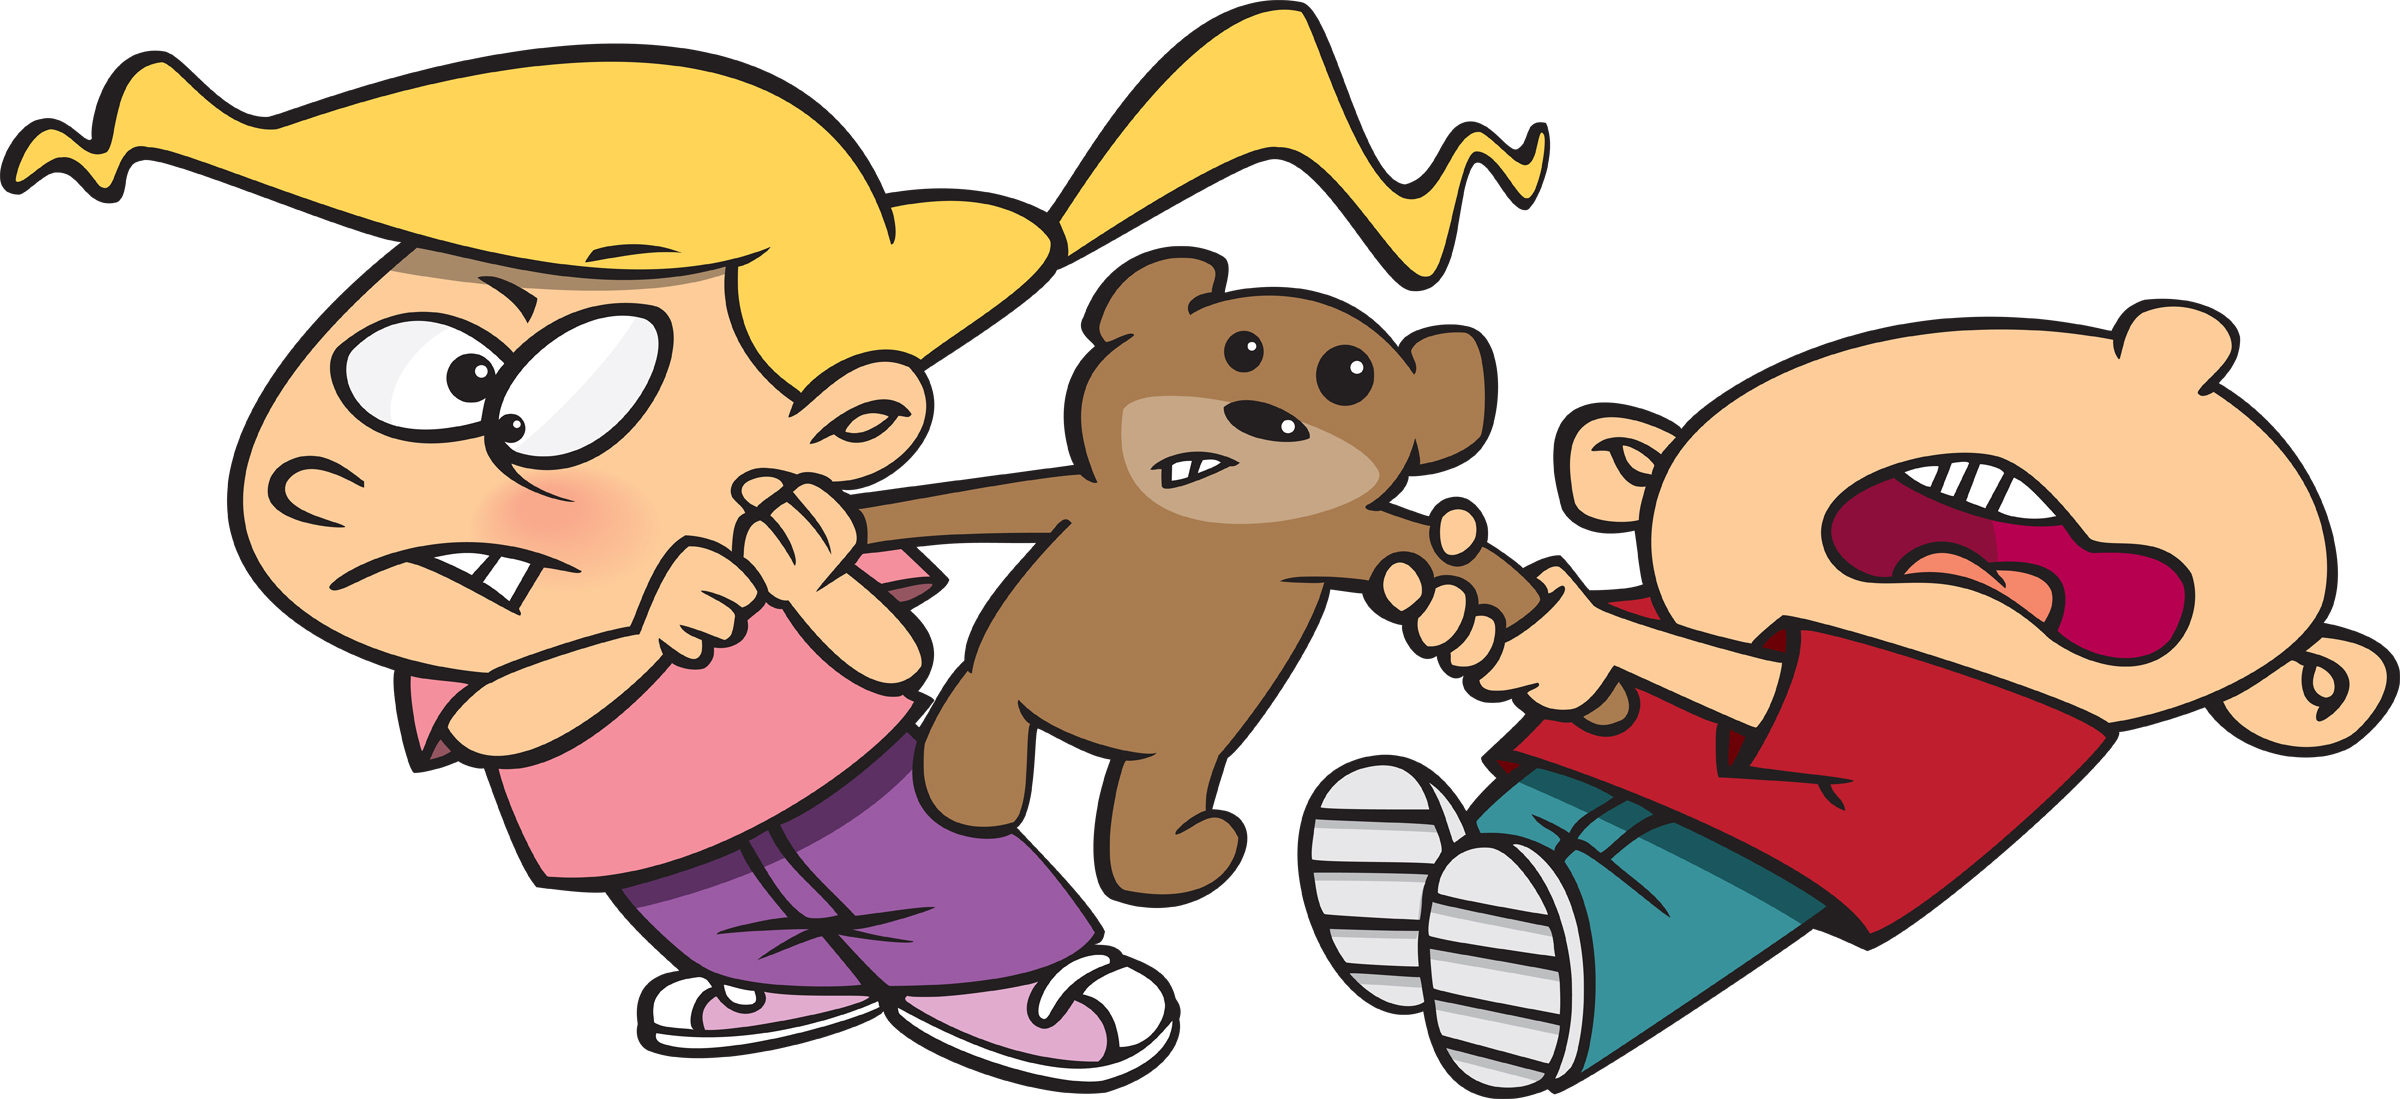 Bad Clipart Kid and other clipart images on Cliparts pub ™.